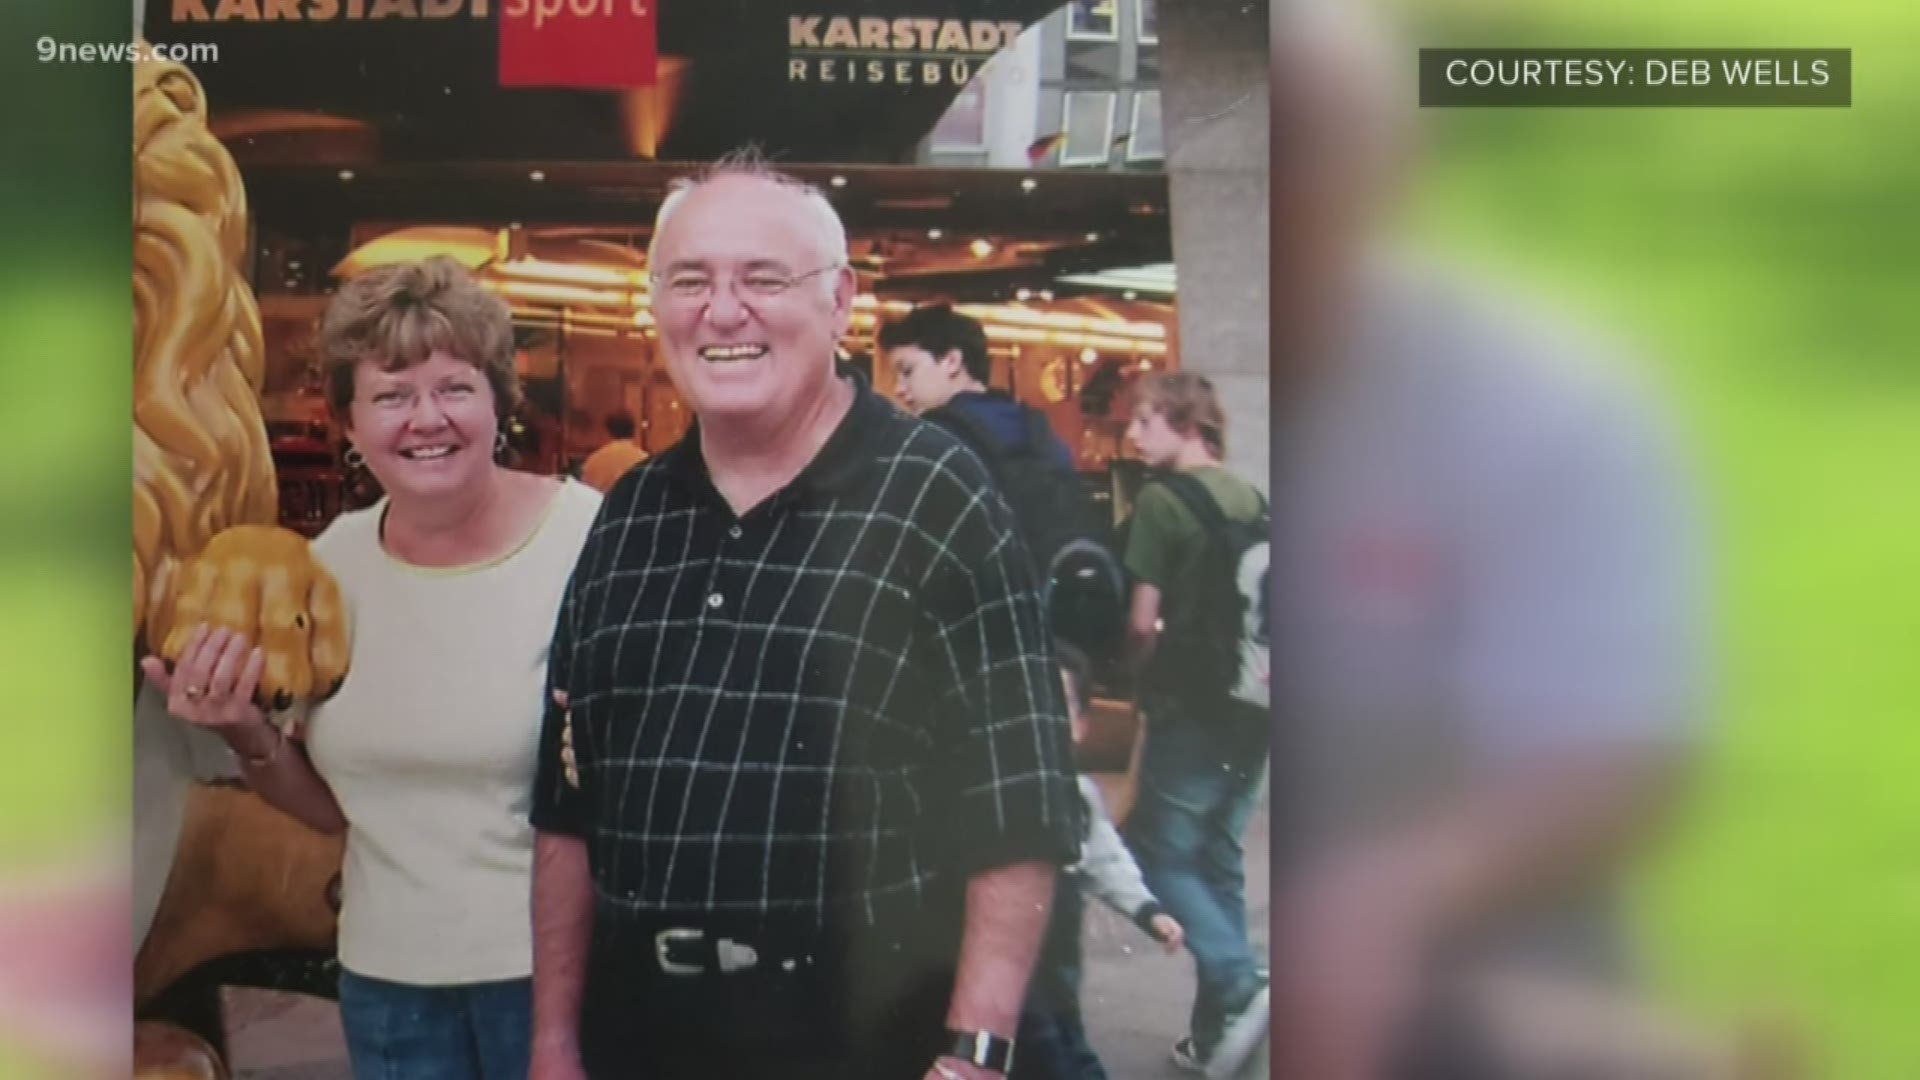 Deb Well's husband, John, was diagnosed with Lewy body dementia. He died in 2014.